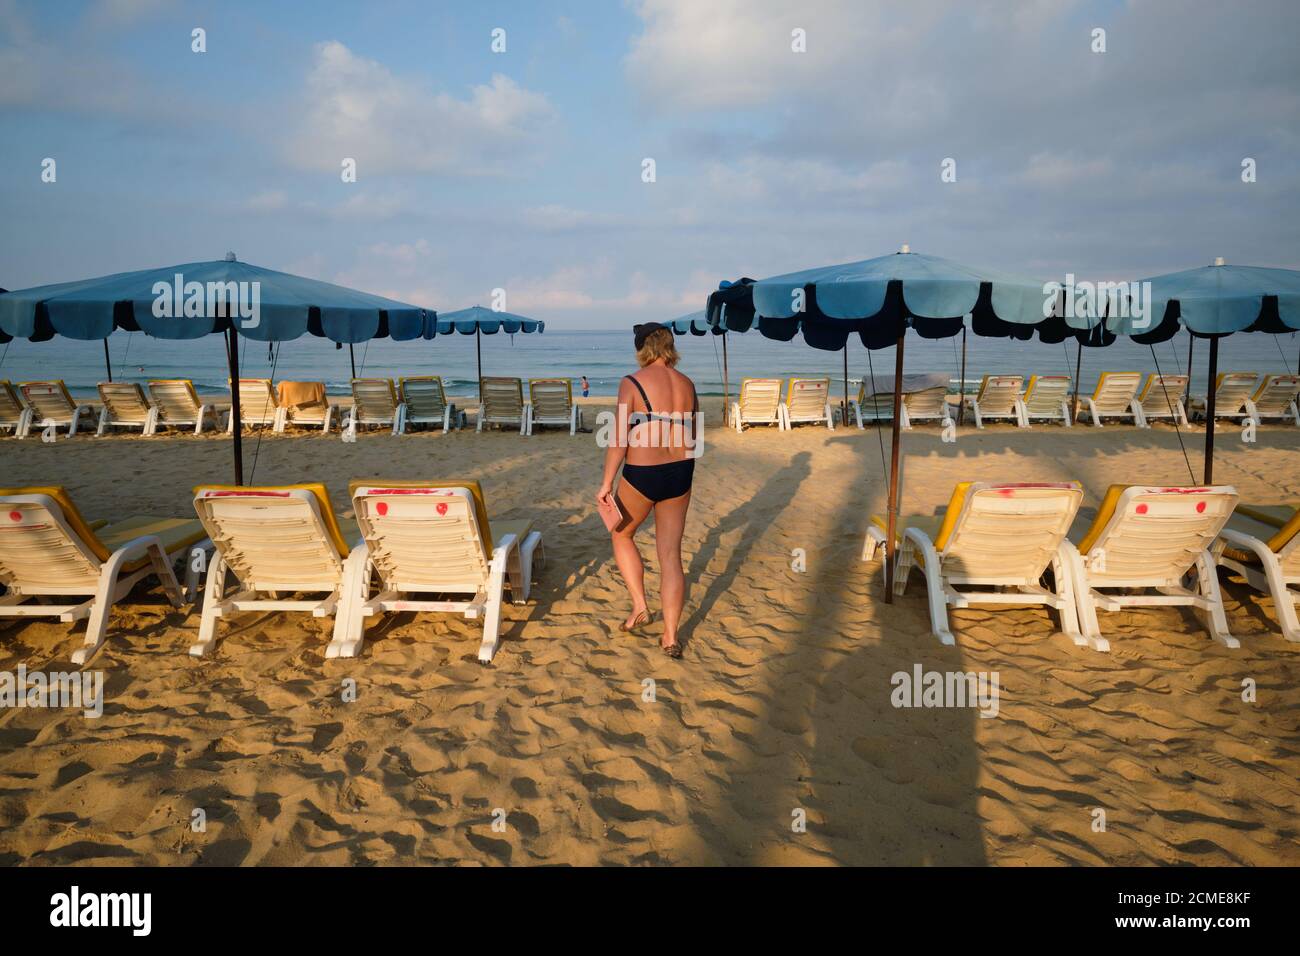 In early morning light, a lone Western female tourist walks between the umbrellas and deck chairs set up on Karon Beach, Phuket, Thailand Stock Photo